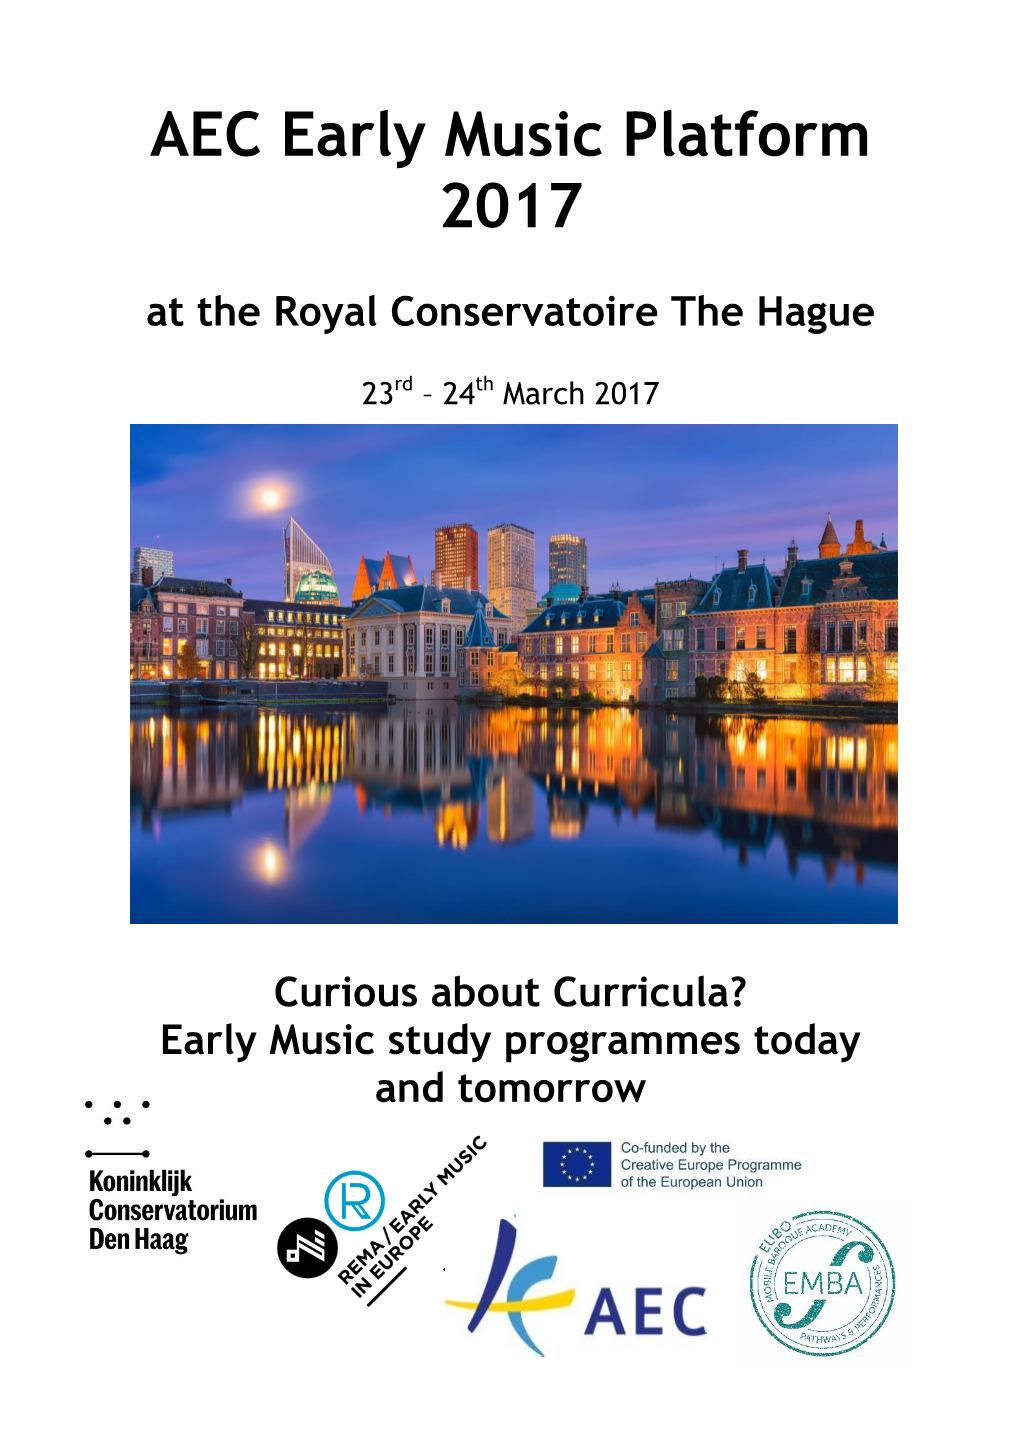 AEC Early Music Platform 2017 at the Royal Conservatoire the Hague